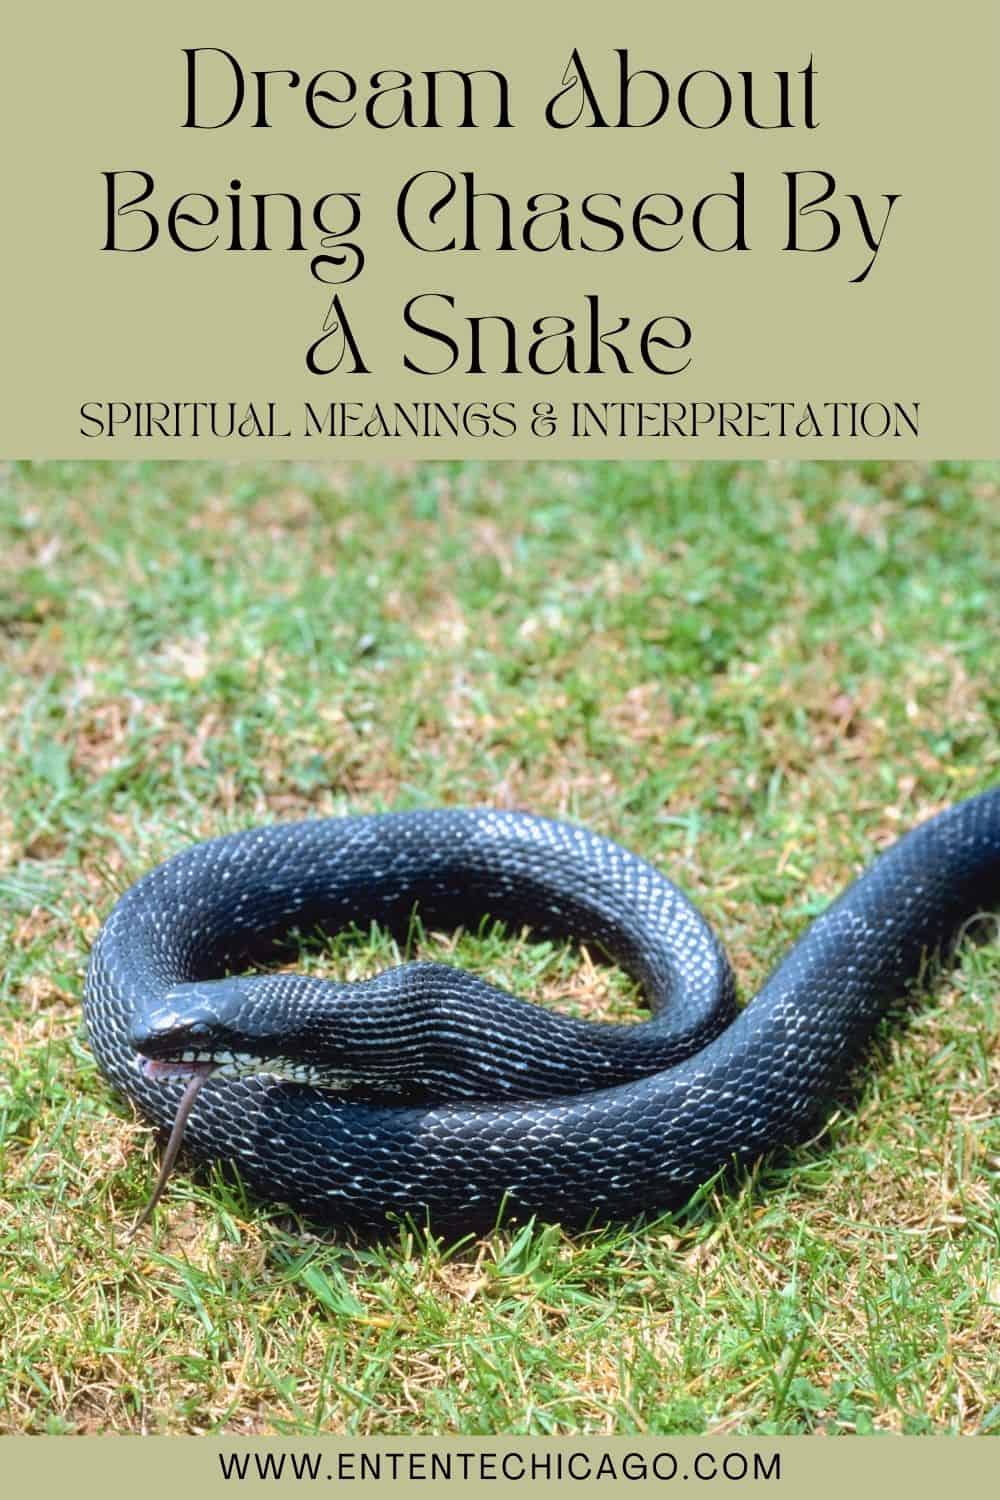 Dream About Being Chased By A Snake (Spiritual Meanings & Interpretation)